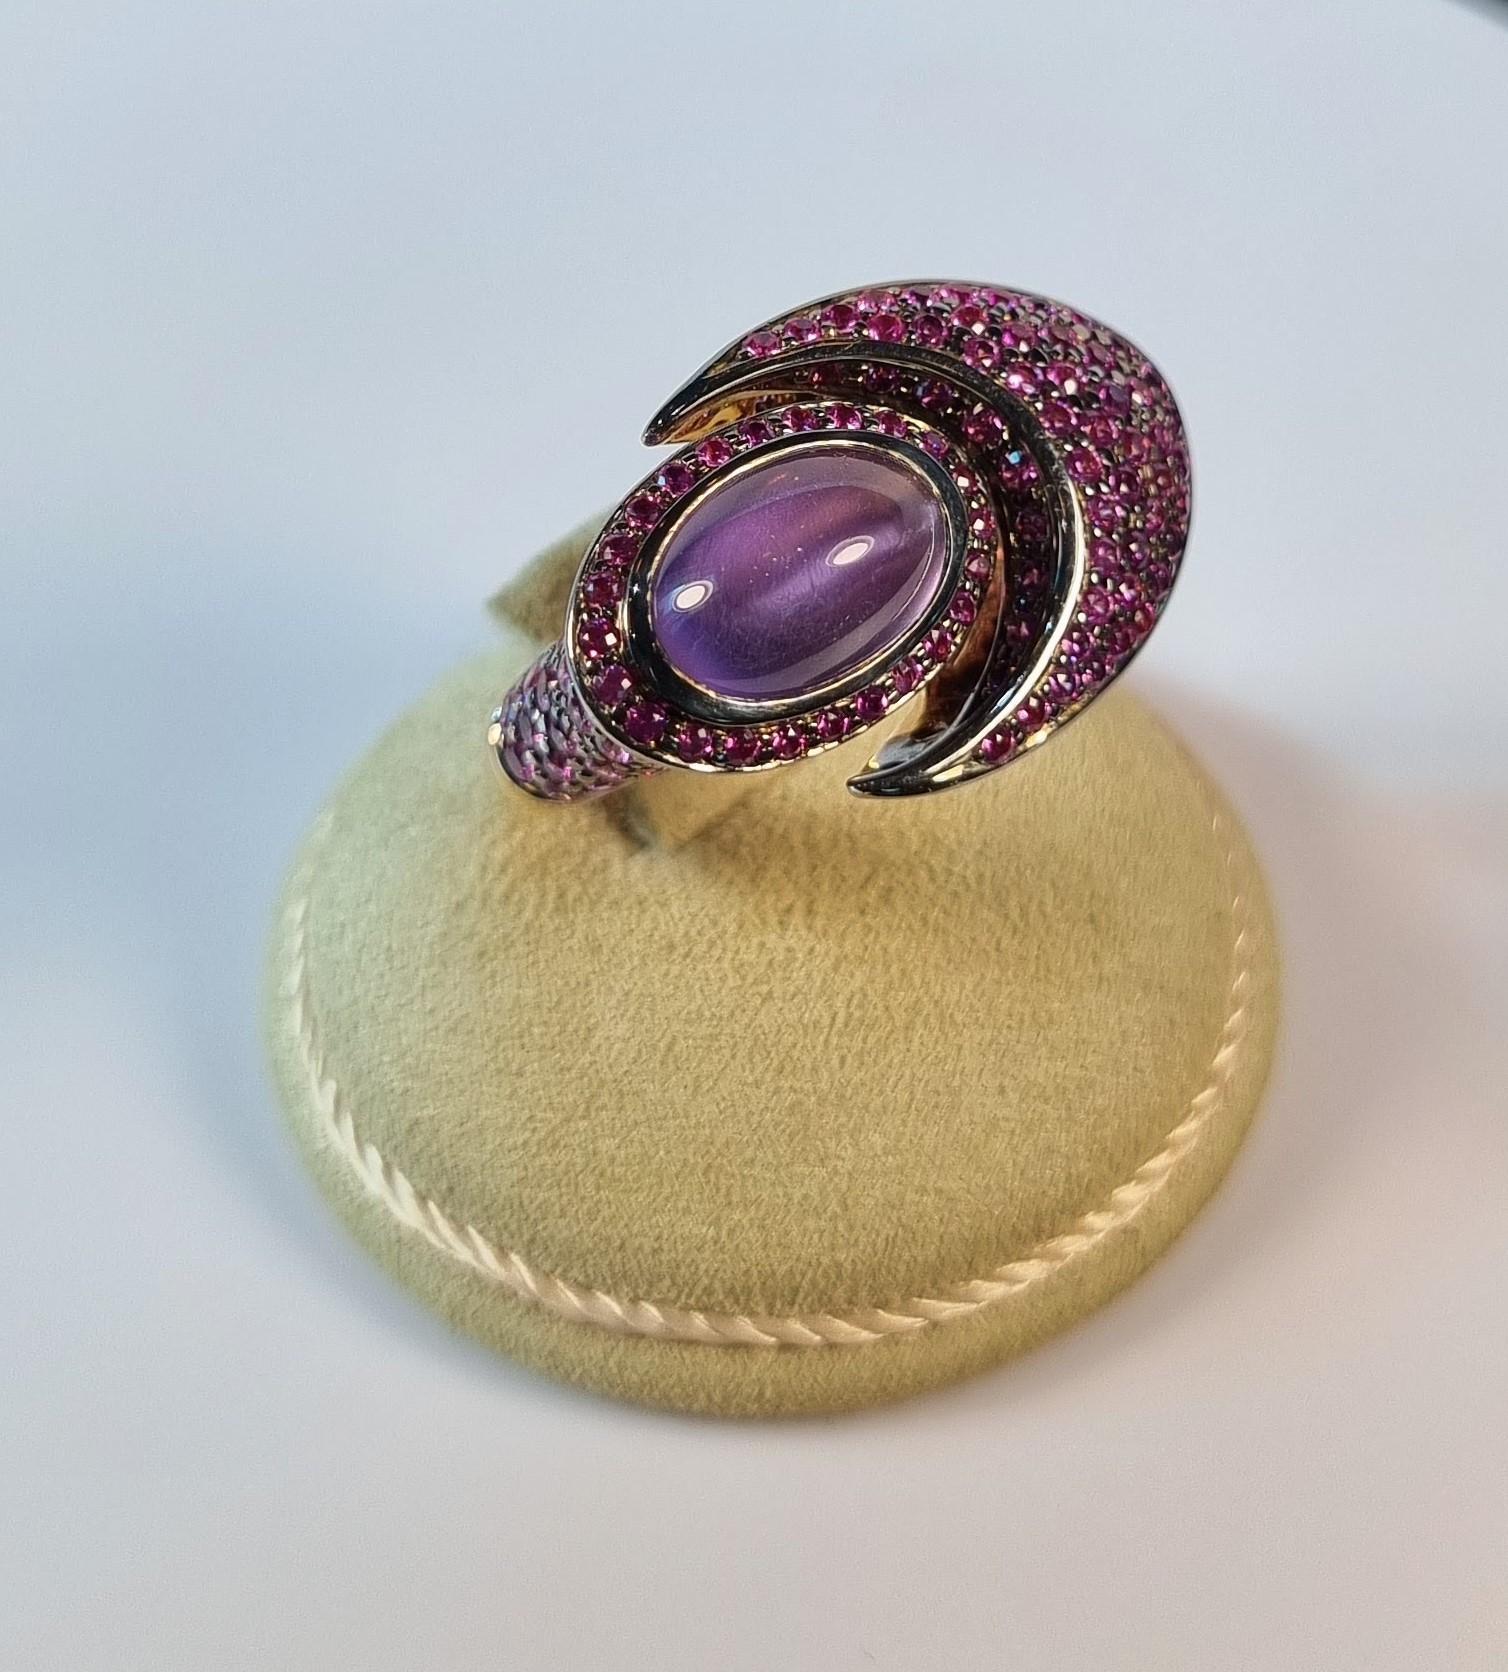 Cabouchon Amethyst and pink sapphires 18k yellow gold ring
Irama Pradera is a dynamic and outgoing designer from Spain that searches always for the best gems and combines classic with contemporary mounting and styles.
Amethyst is a natural